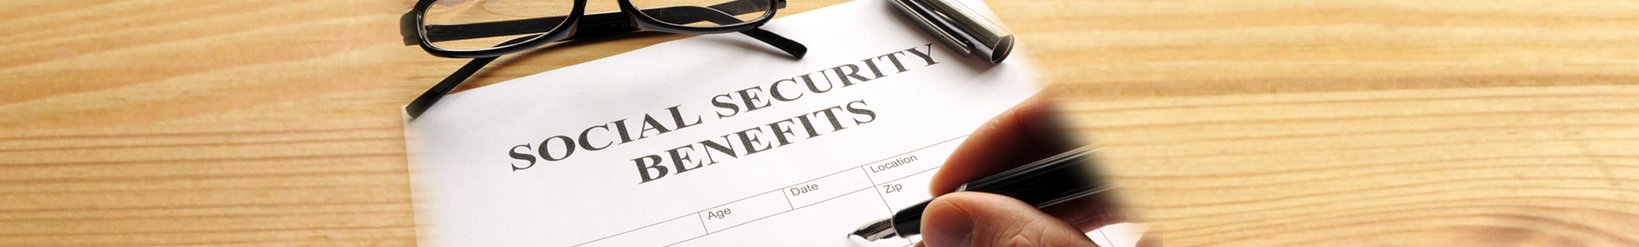 Social Security Disability Benefits for HIV / AIDS (Page 1)